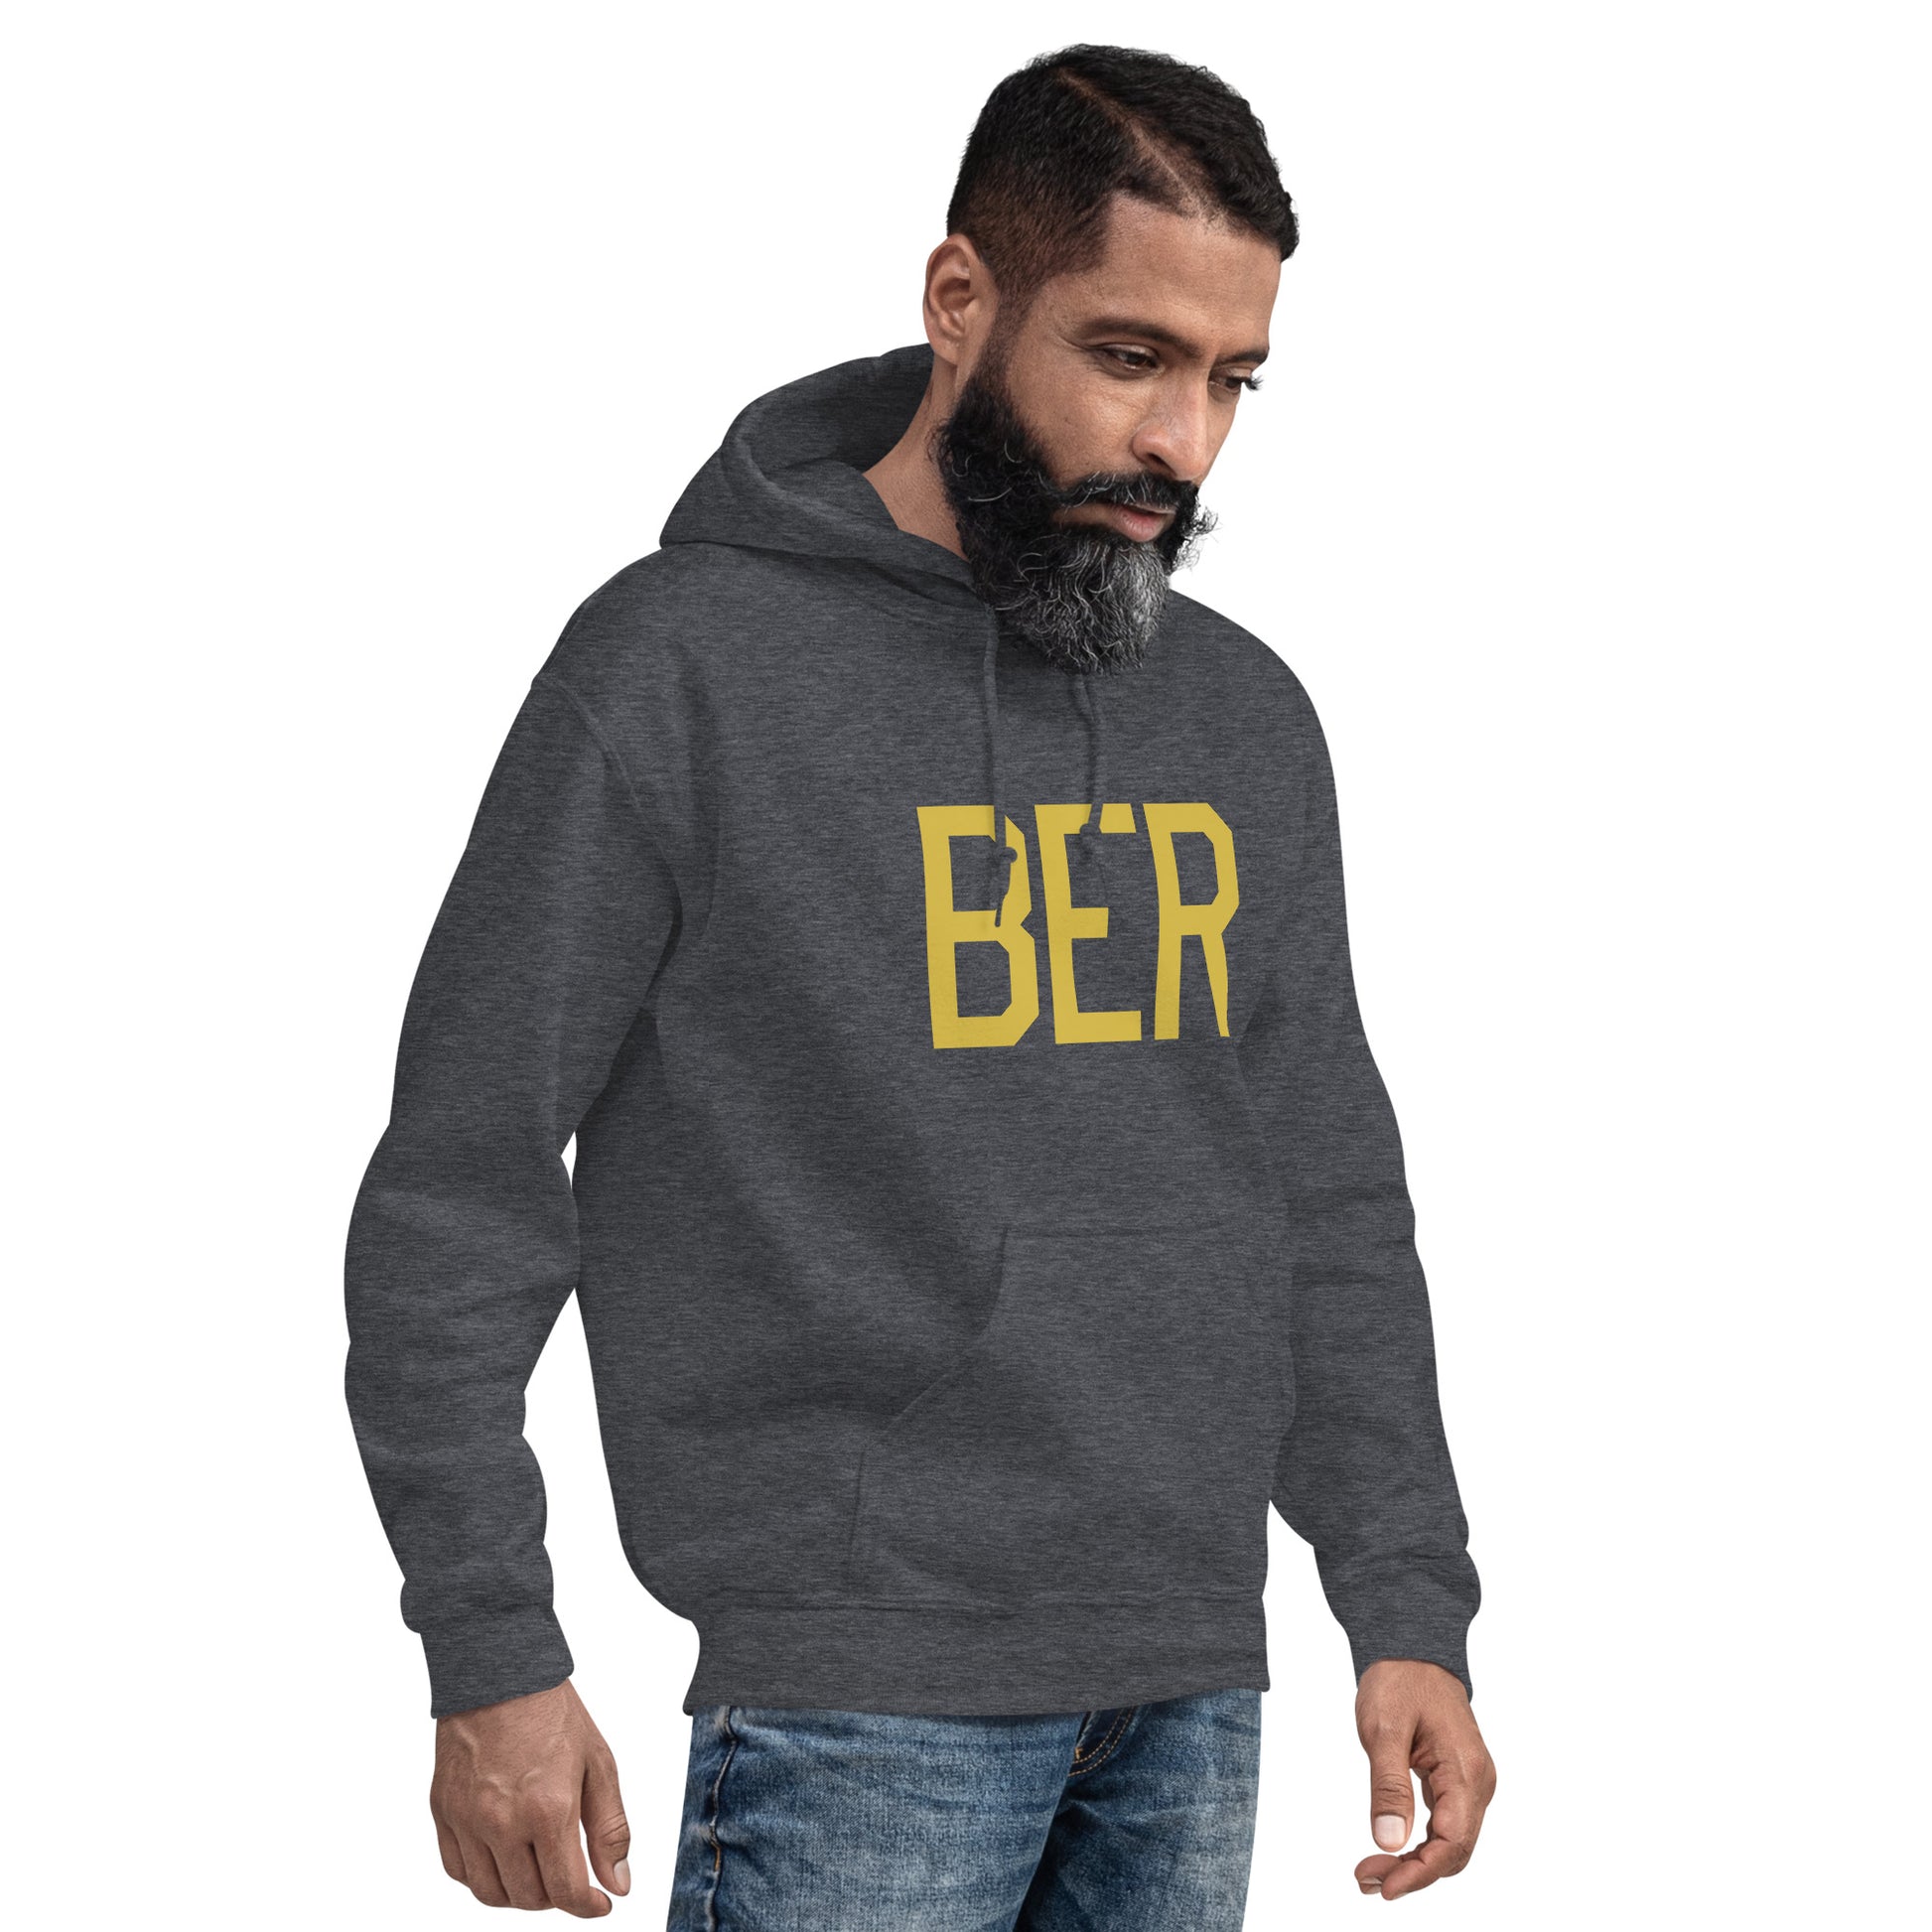 Aviation Gift Unisex Hoodie - Old Gold Graphic • BER Berlin • YHM Designs - Image 06